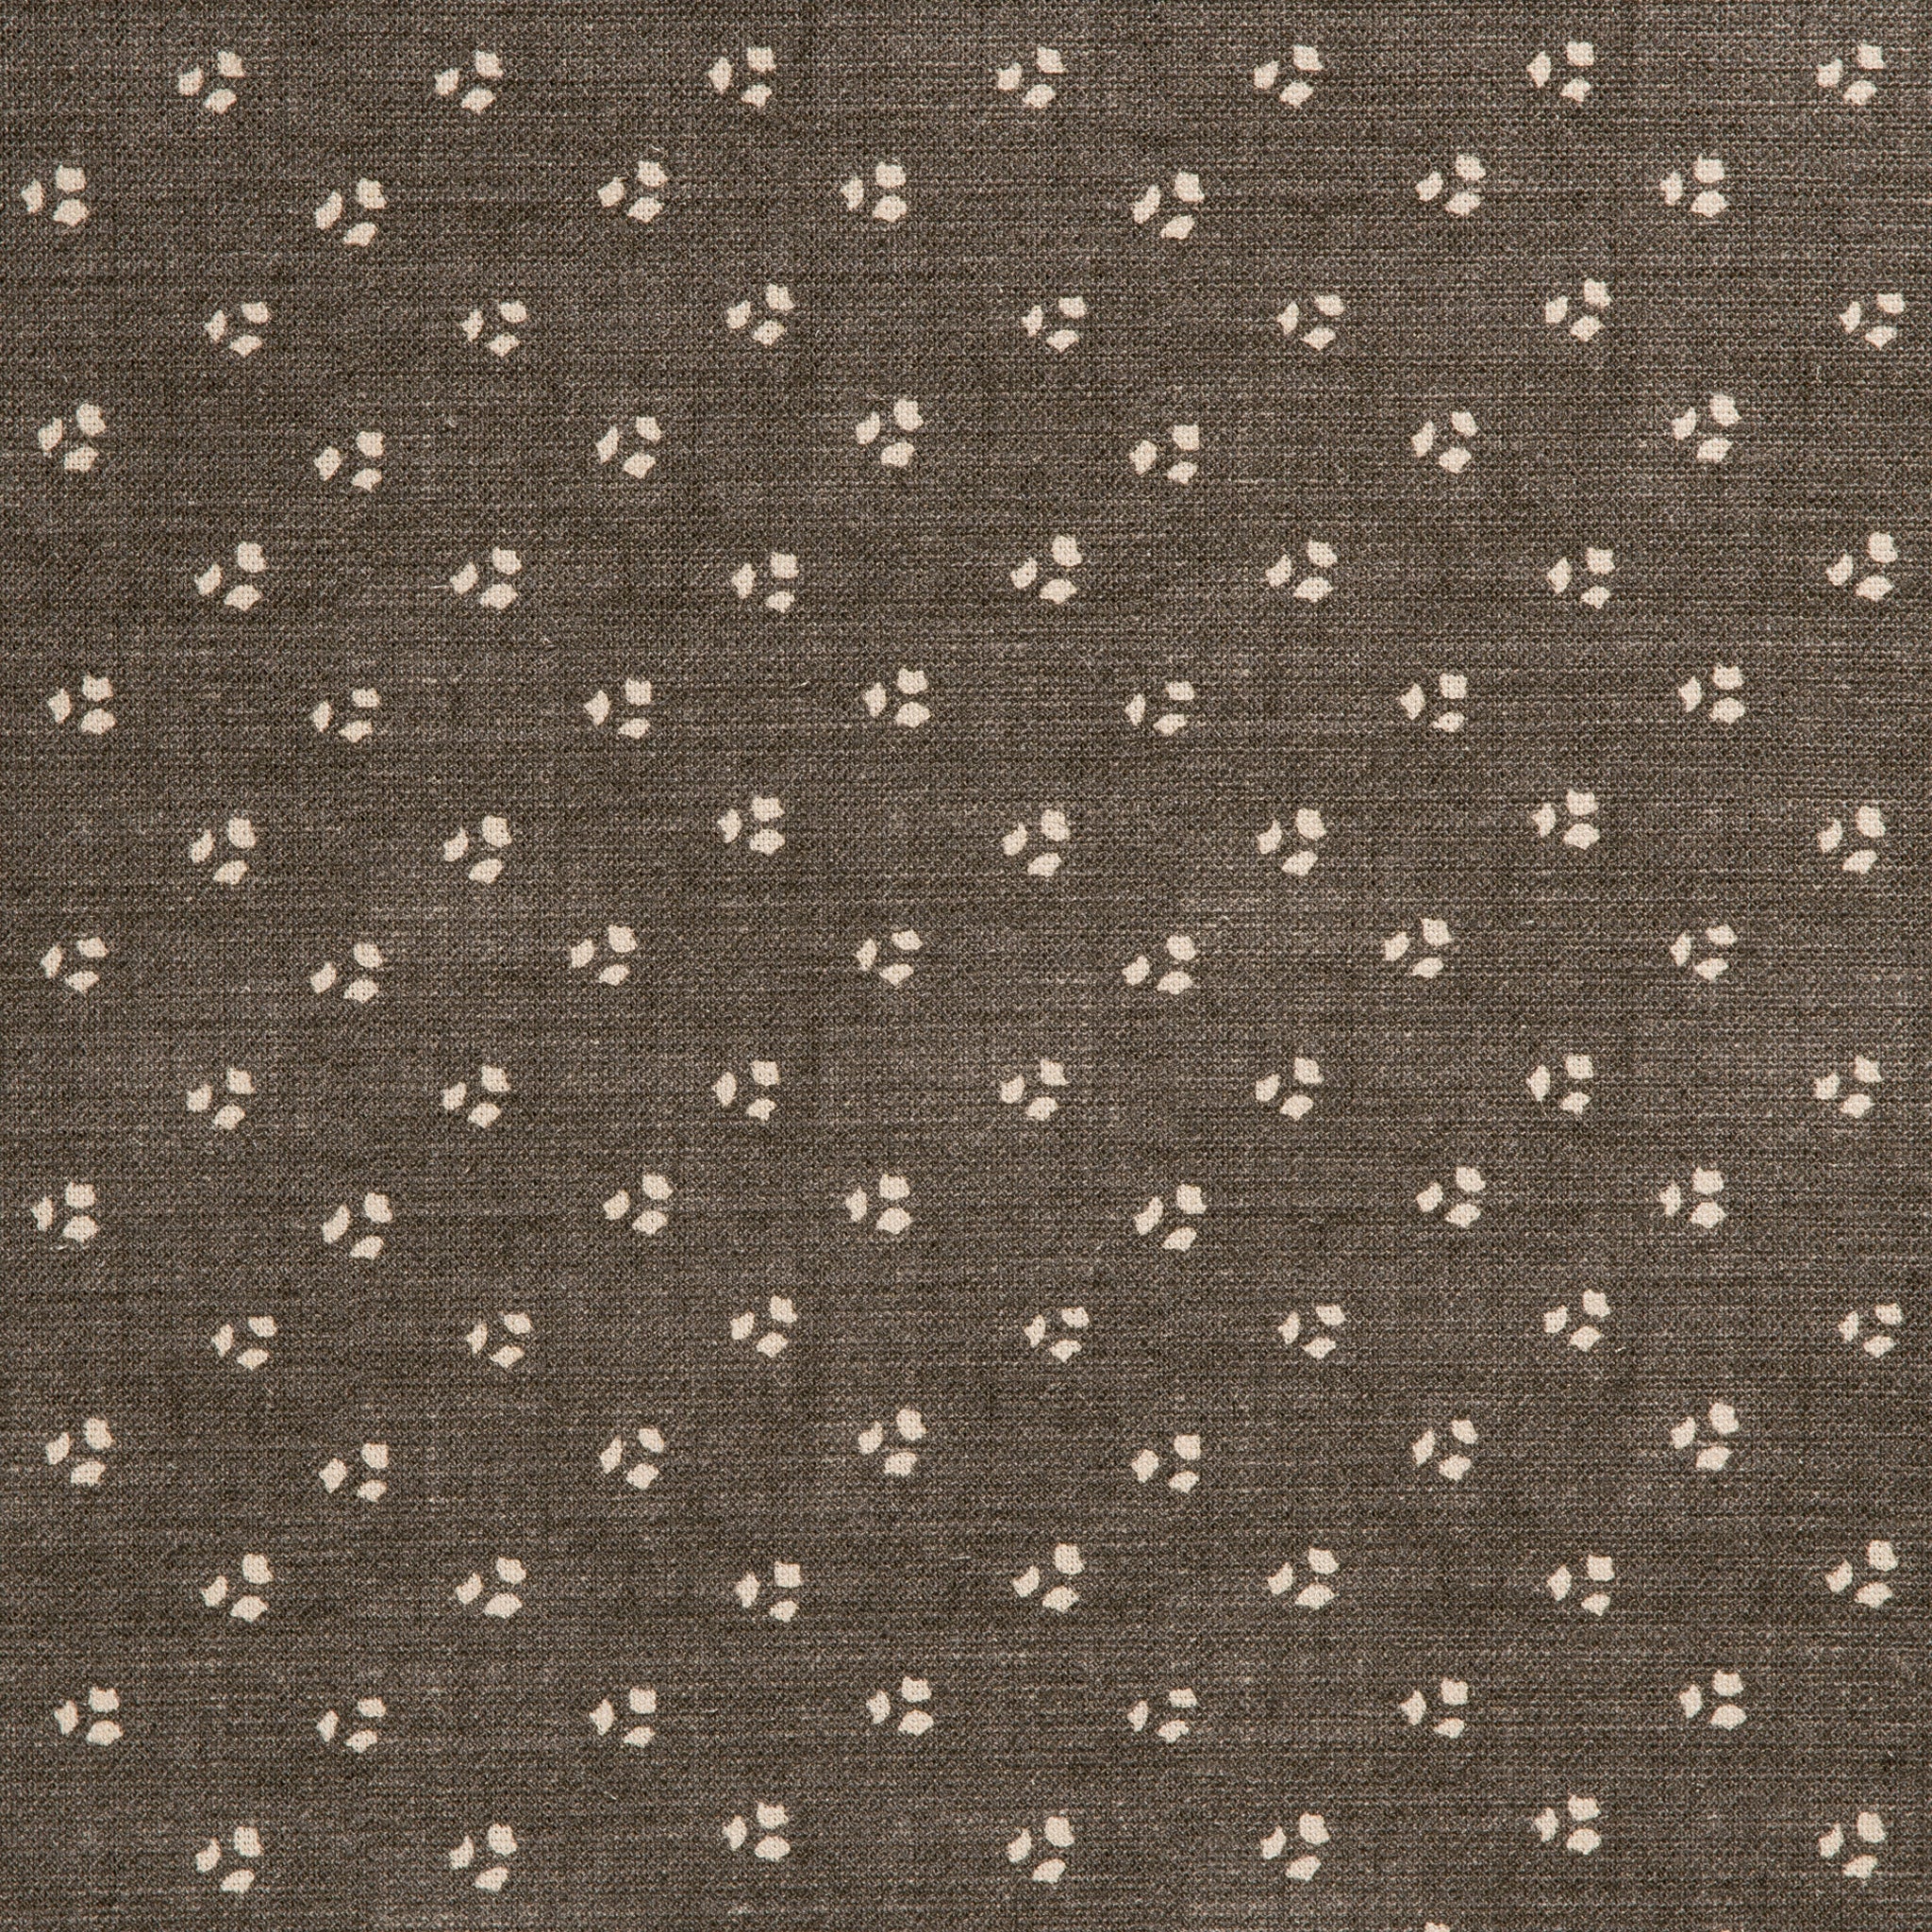 Detail of a linen fabric in a clustered dot pattern in beige on a dark gray field.